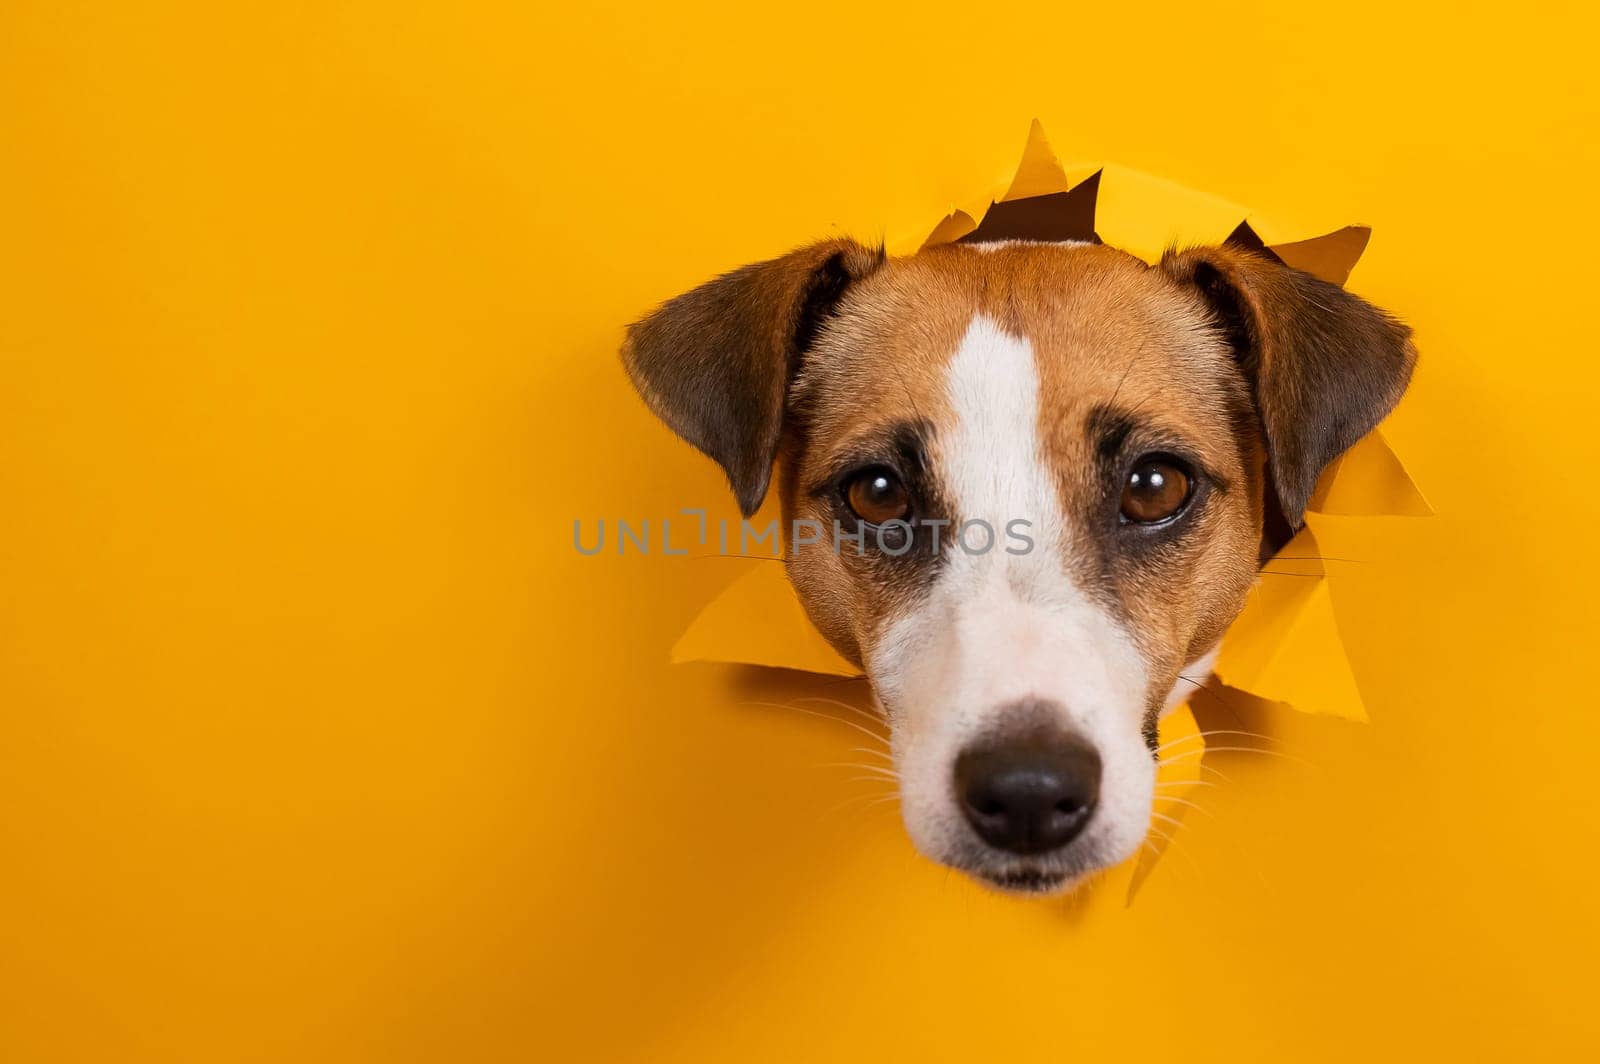 Funny dog jack russell terrier leans out of a hole in a paper orange background. by mrwed54